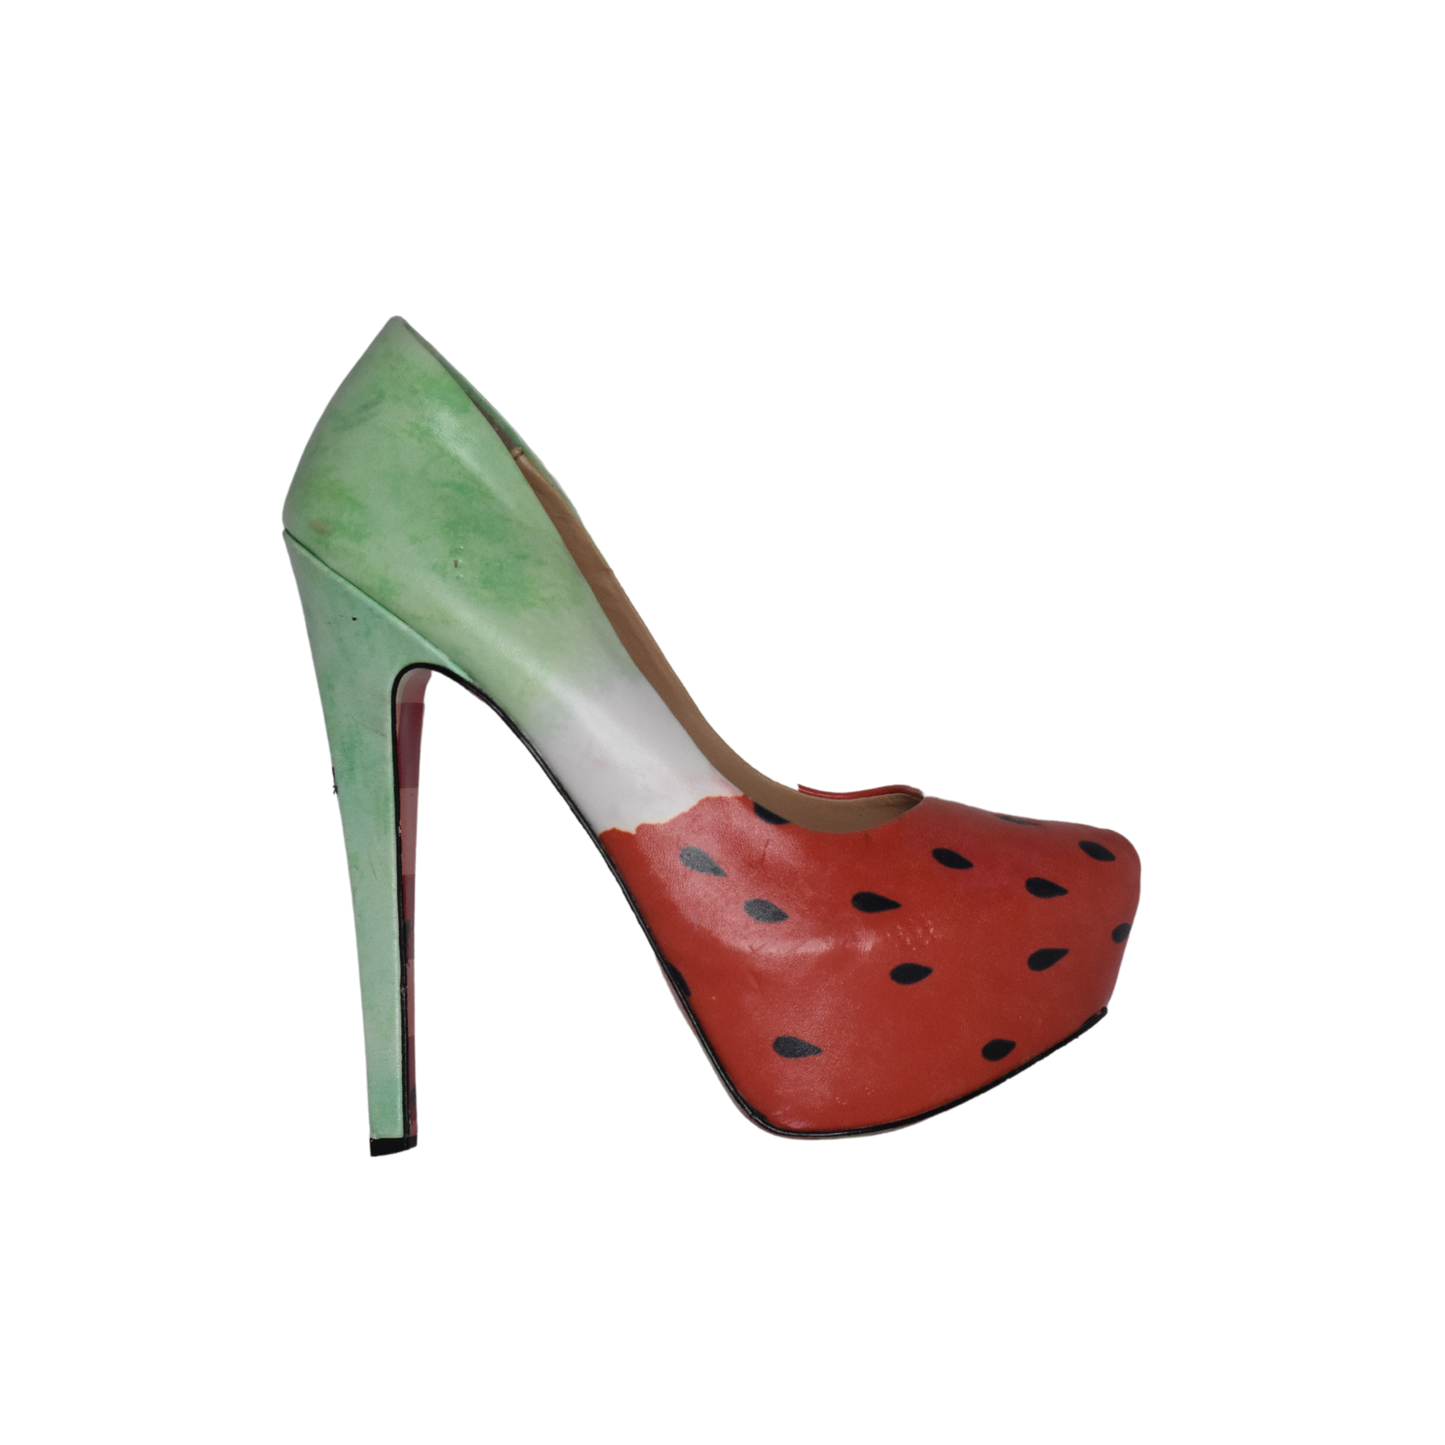 Taylor Says High Heels Watermelon and Ants Green, Red Size 7M SKU 000249-5